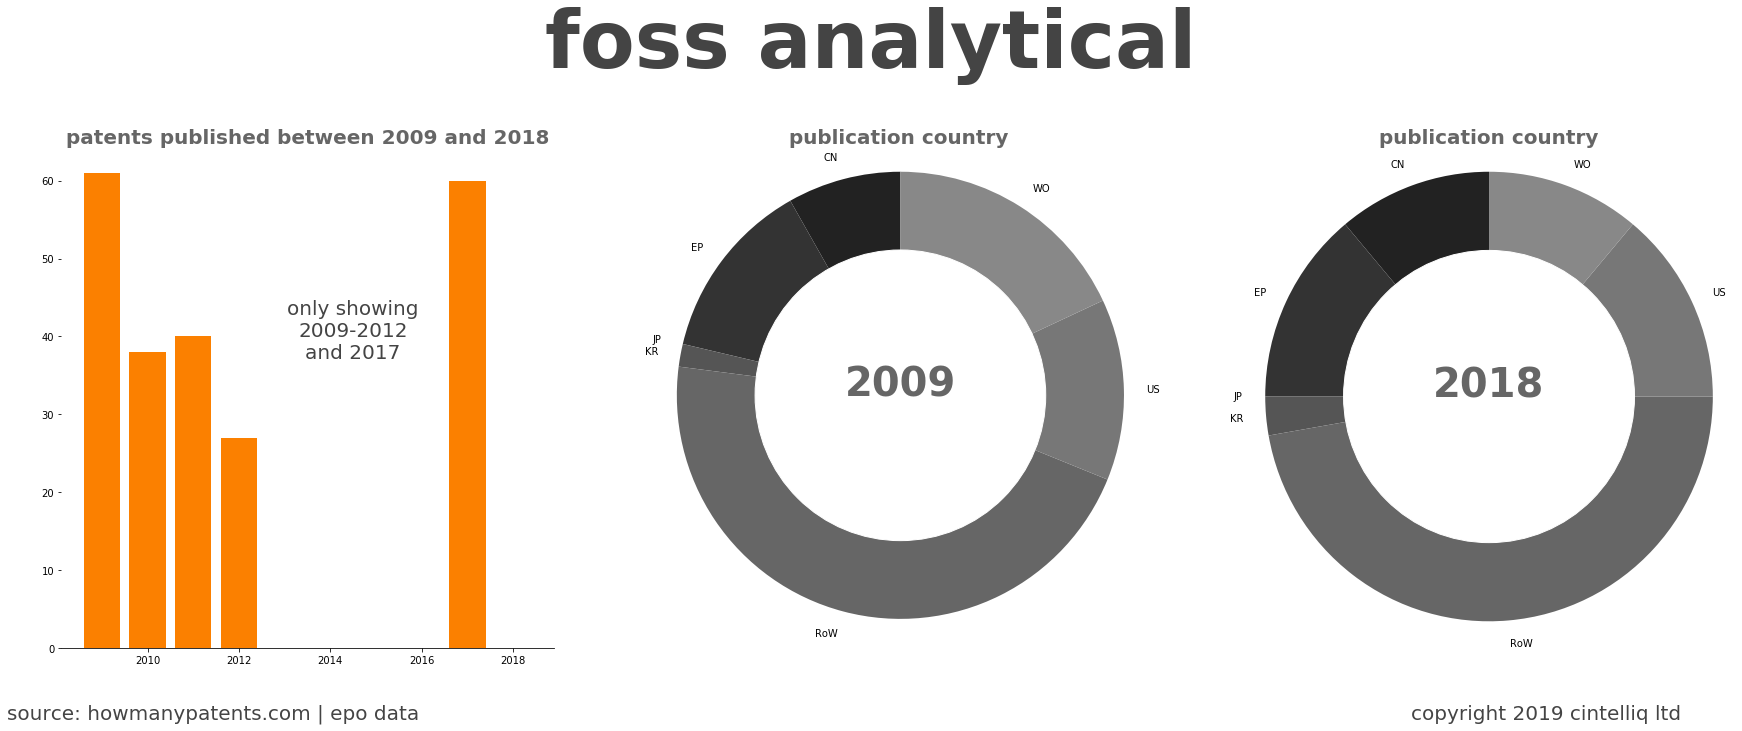 summary of patents for Foss Analytical